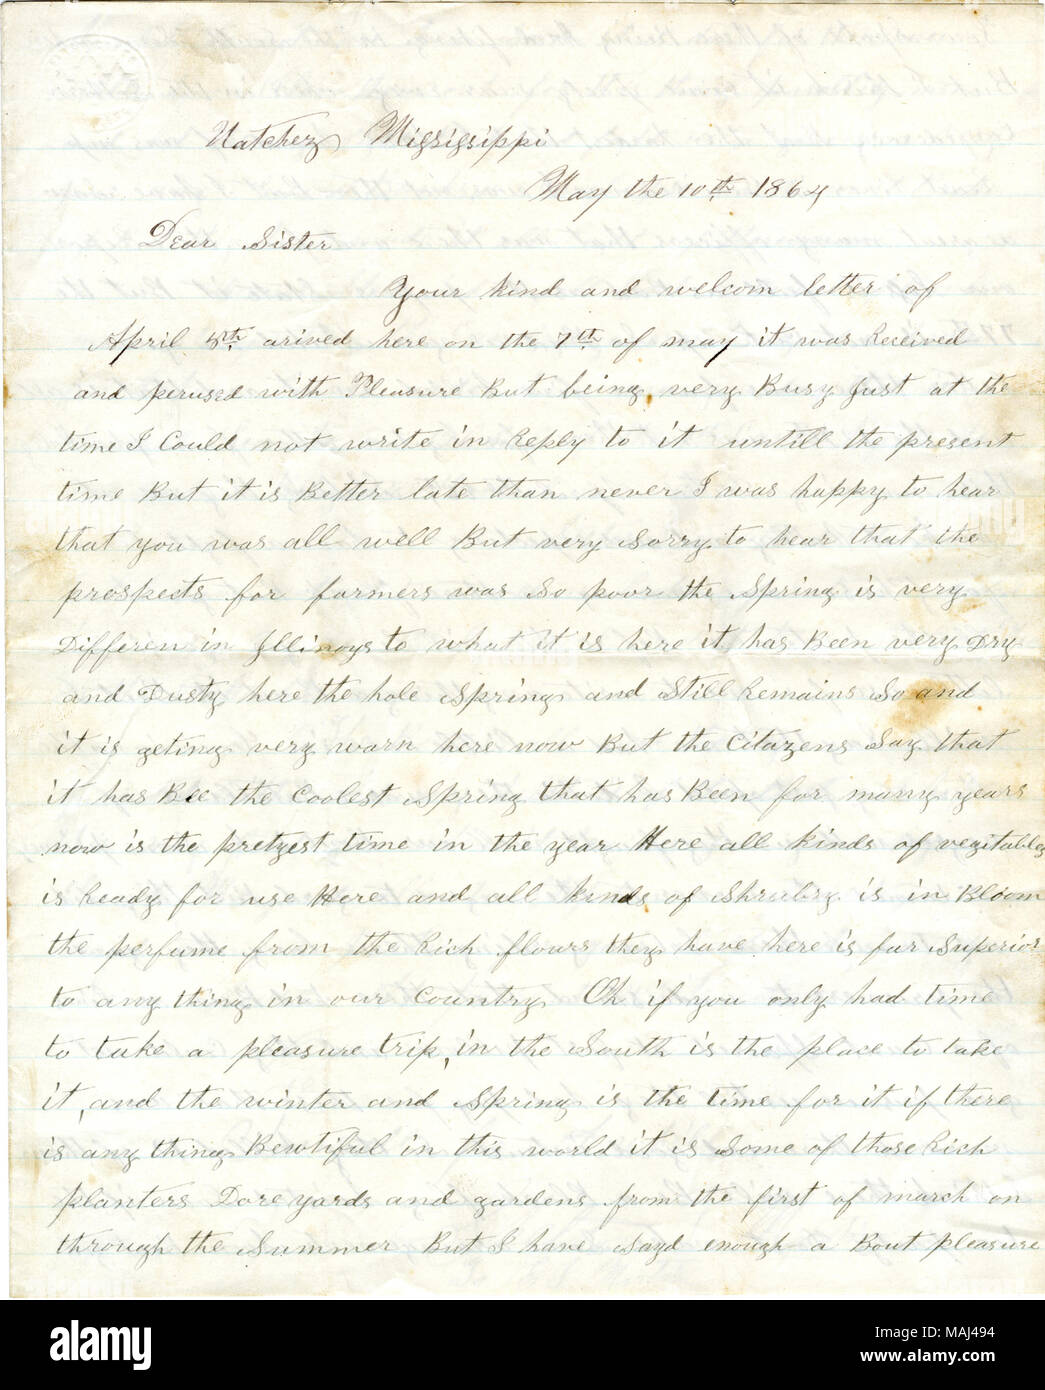 Describes the weather in the South. Reports on various battles and skirmishes that have been taking place.  Transcription: Natchez Mississippi May the 10th 1864 Dear Sister Your kind and welcom letter of April 8th arived here on the 7th of may it was Received and perused with Pleasure But being very Busy Just at the time I Could not write in Reply to it untill the present time But it is Better late than never I was happy to hear that you was all well But very sorry to hear that the prospects for farmers was So poor the Spring is very Differen in Illinoys[Illinois] to what it is here it has Bee Stock Photo